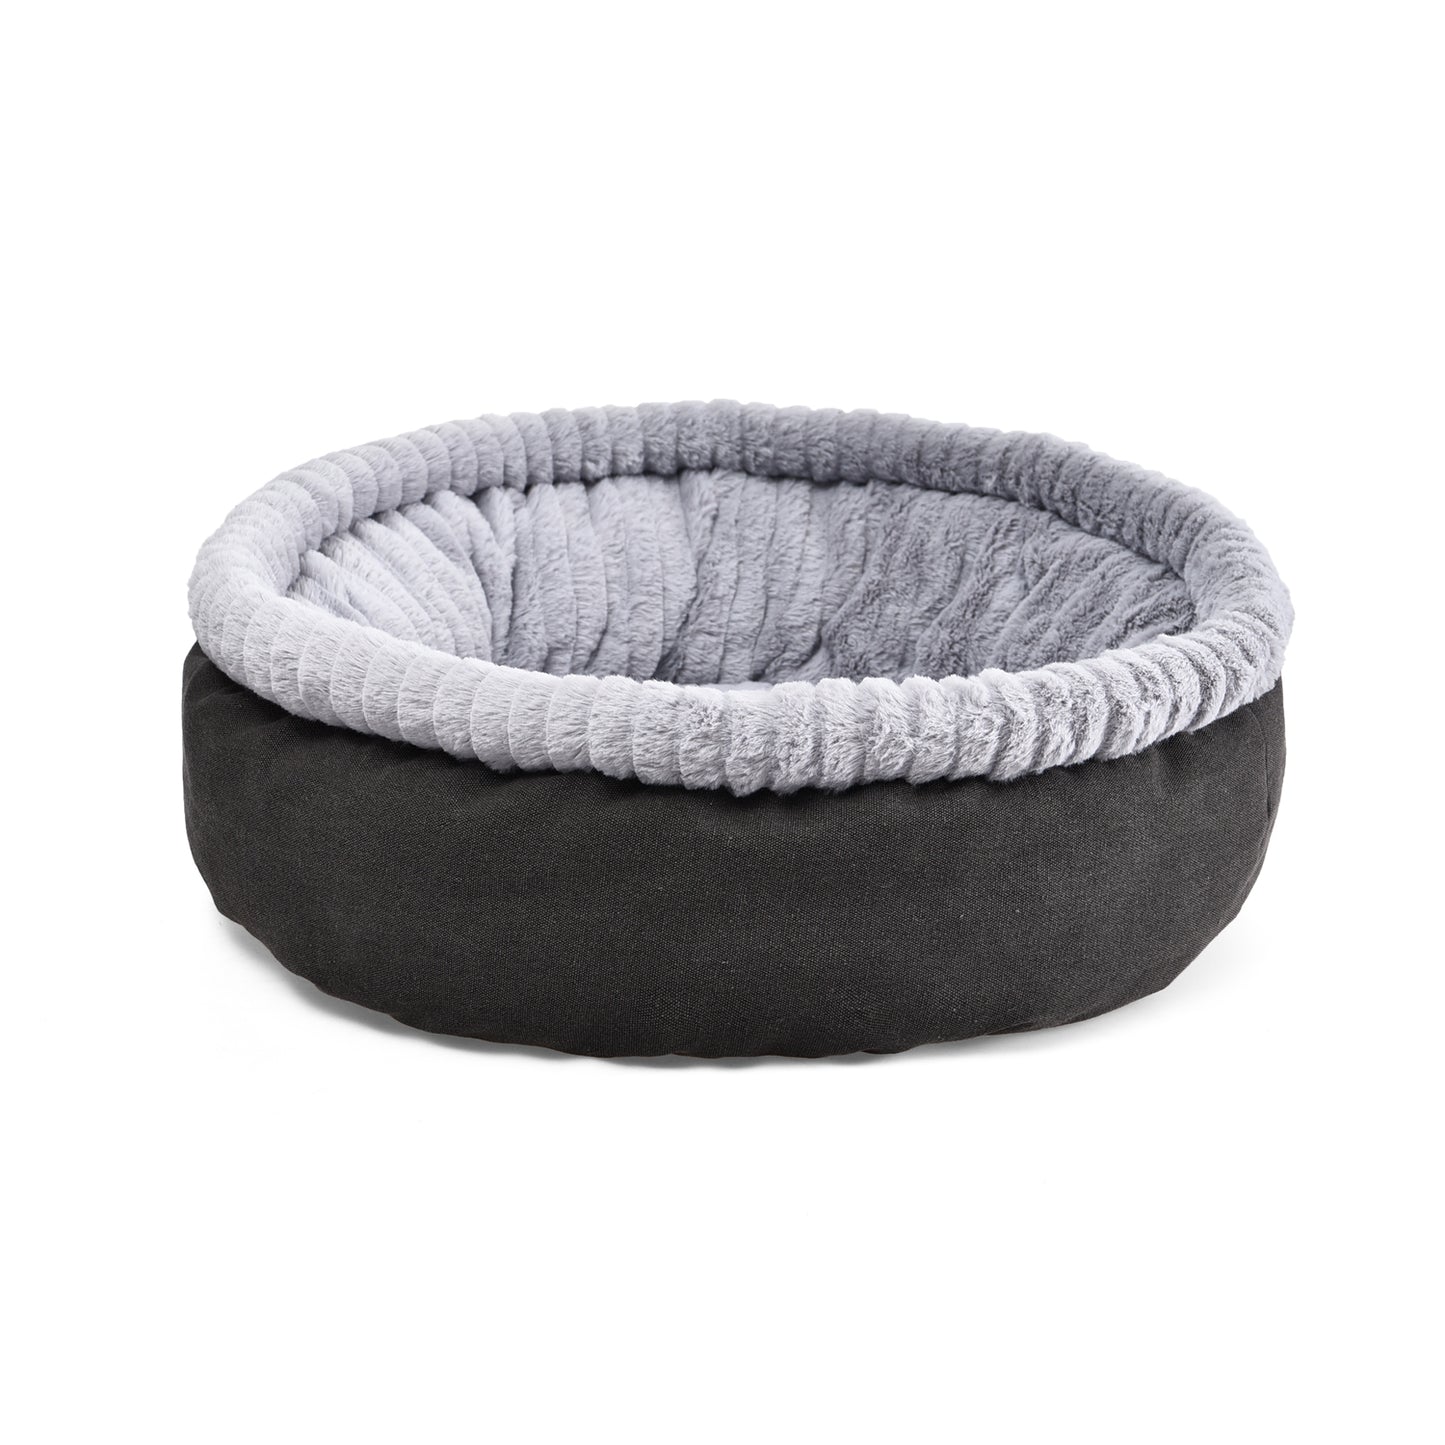 Cat Craft Large Grey Deluxe Super Soft Cat Bed (18" round Deluxe Bolster Bed)